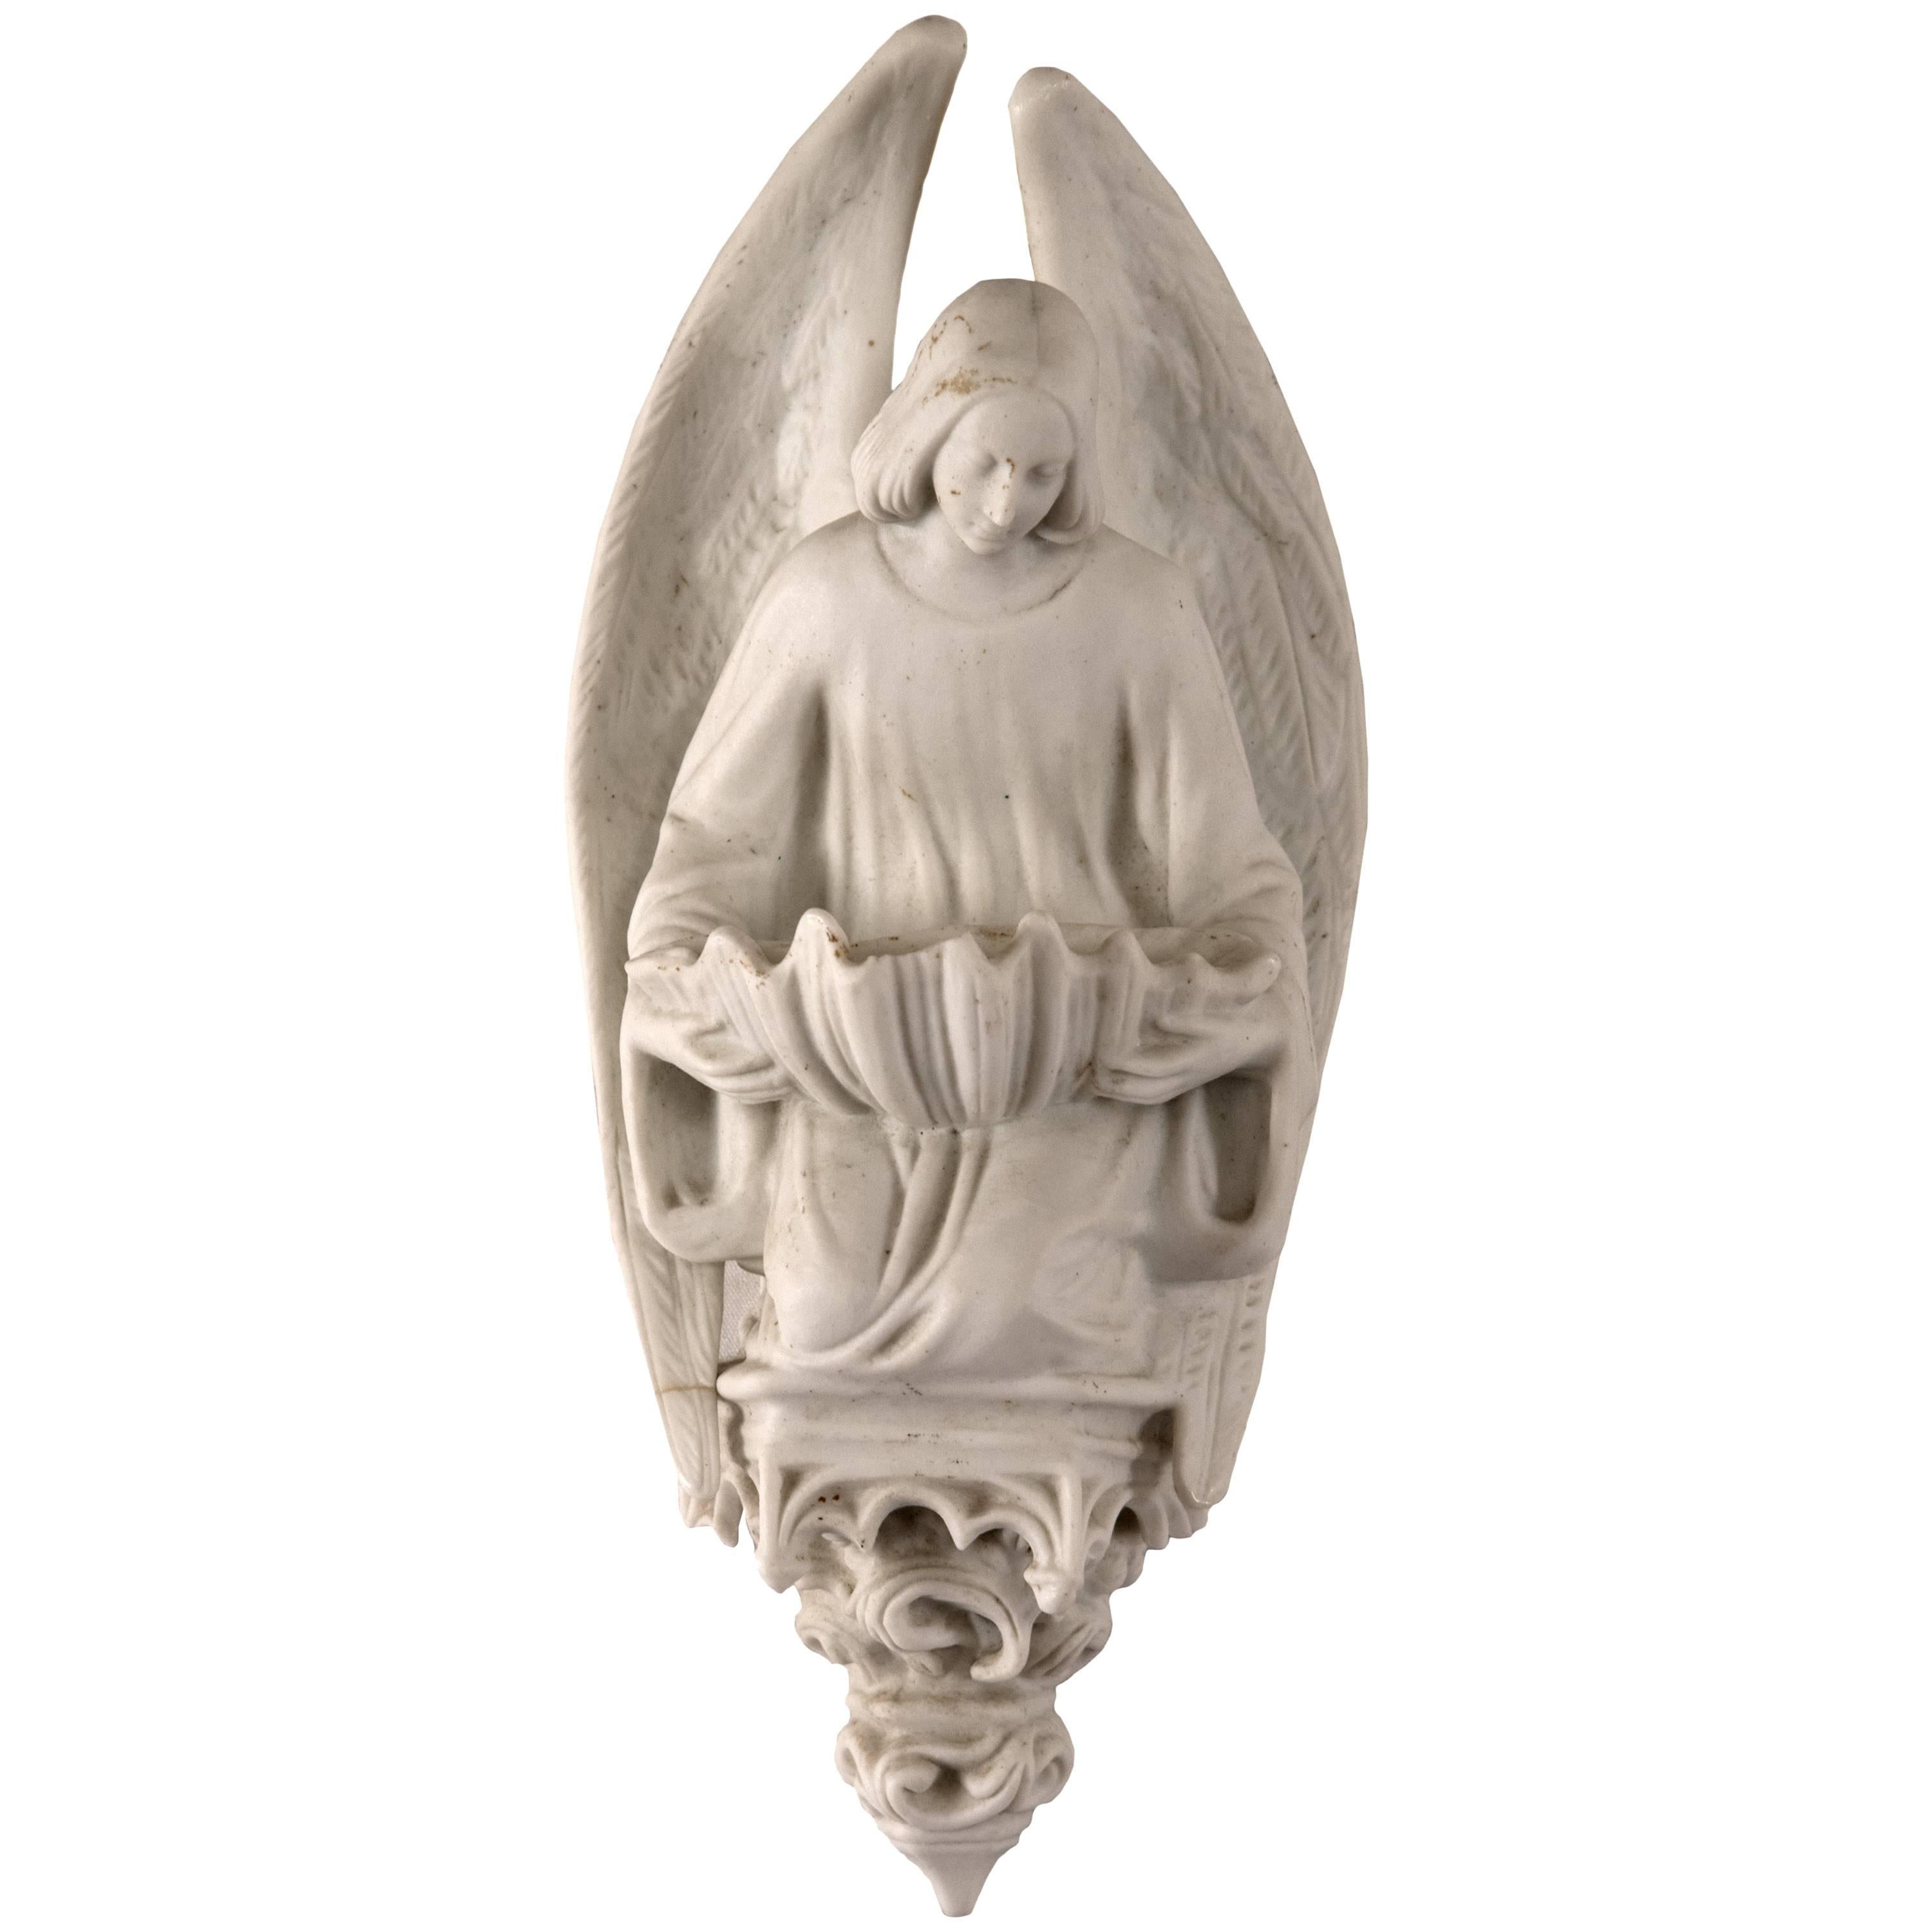 19th Century Bisque Porcelain Holy Water Font of an Angel